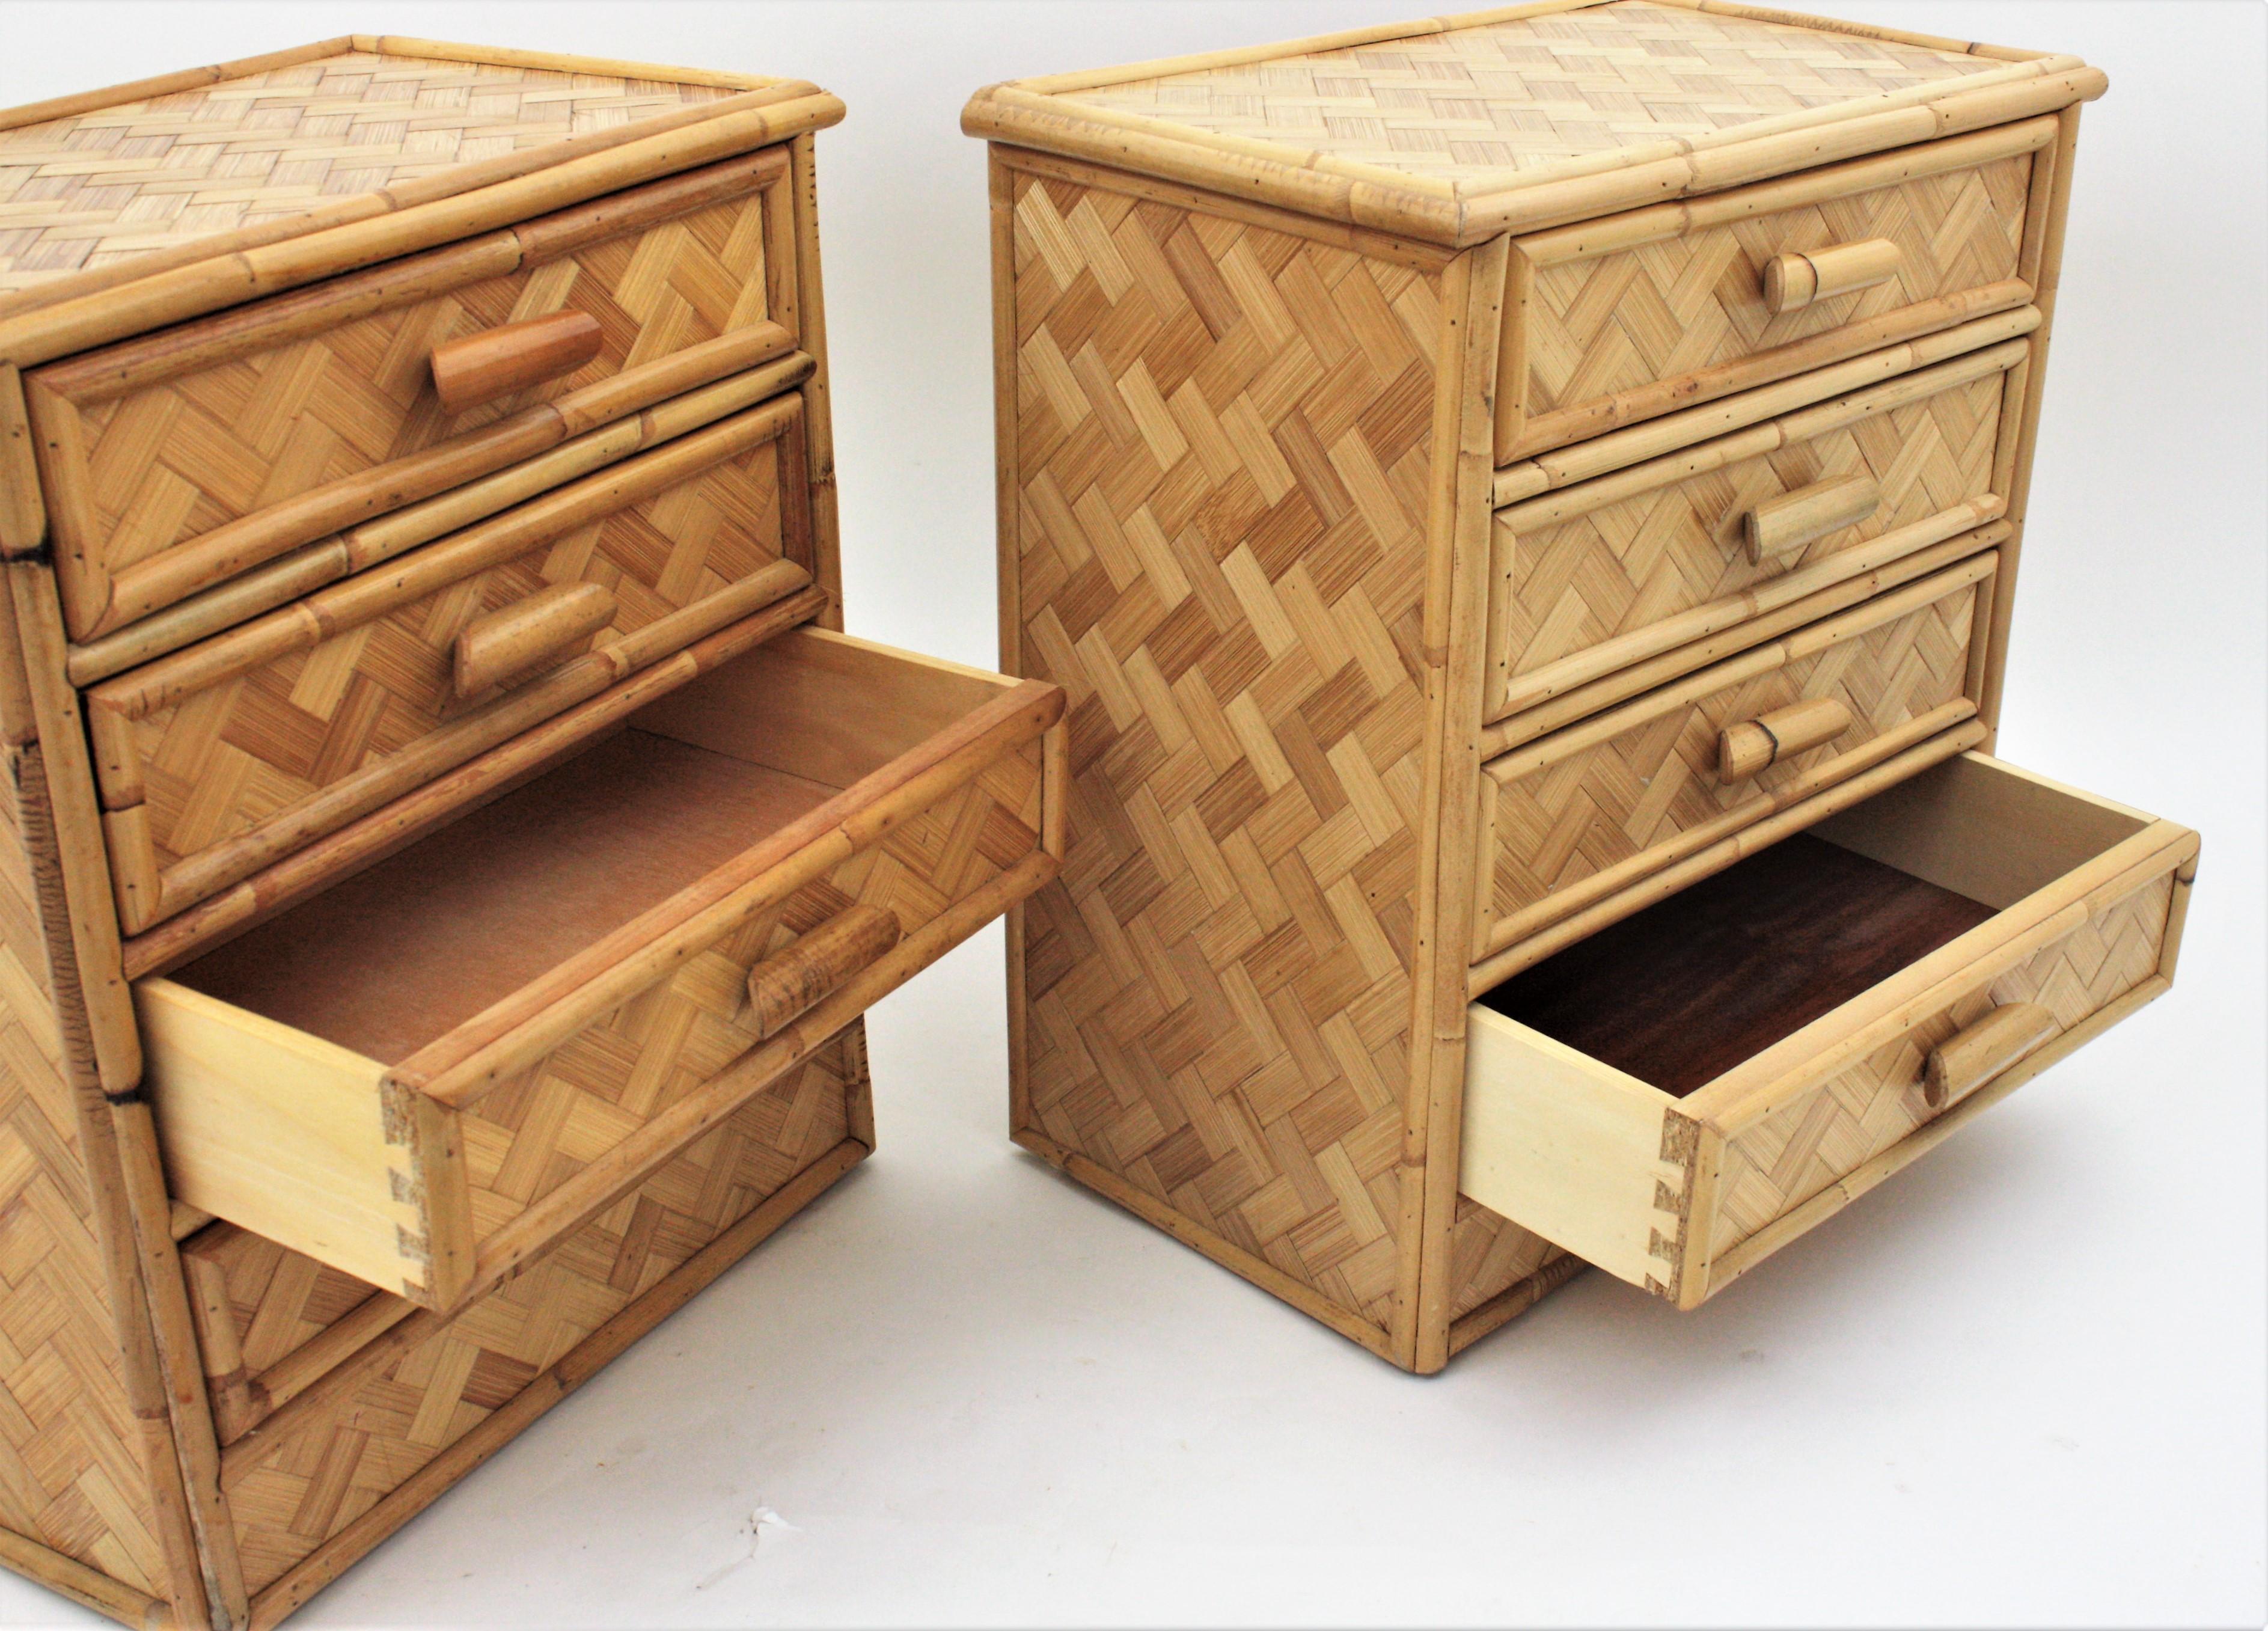 Pair of Rattan Bamboo Nightstands / Small Chests, 1970s For Sale 8